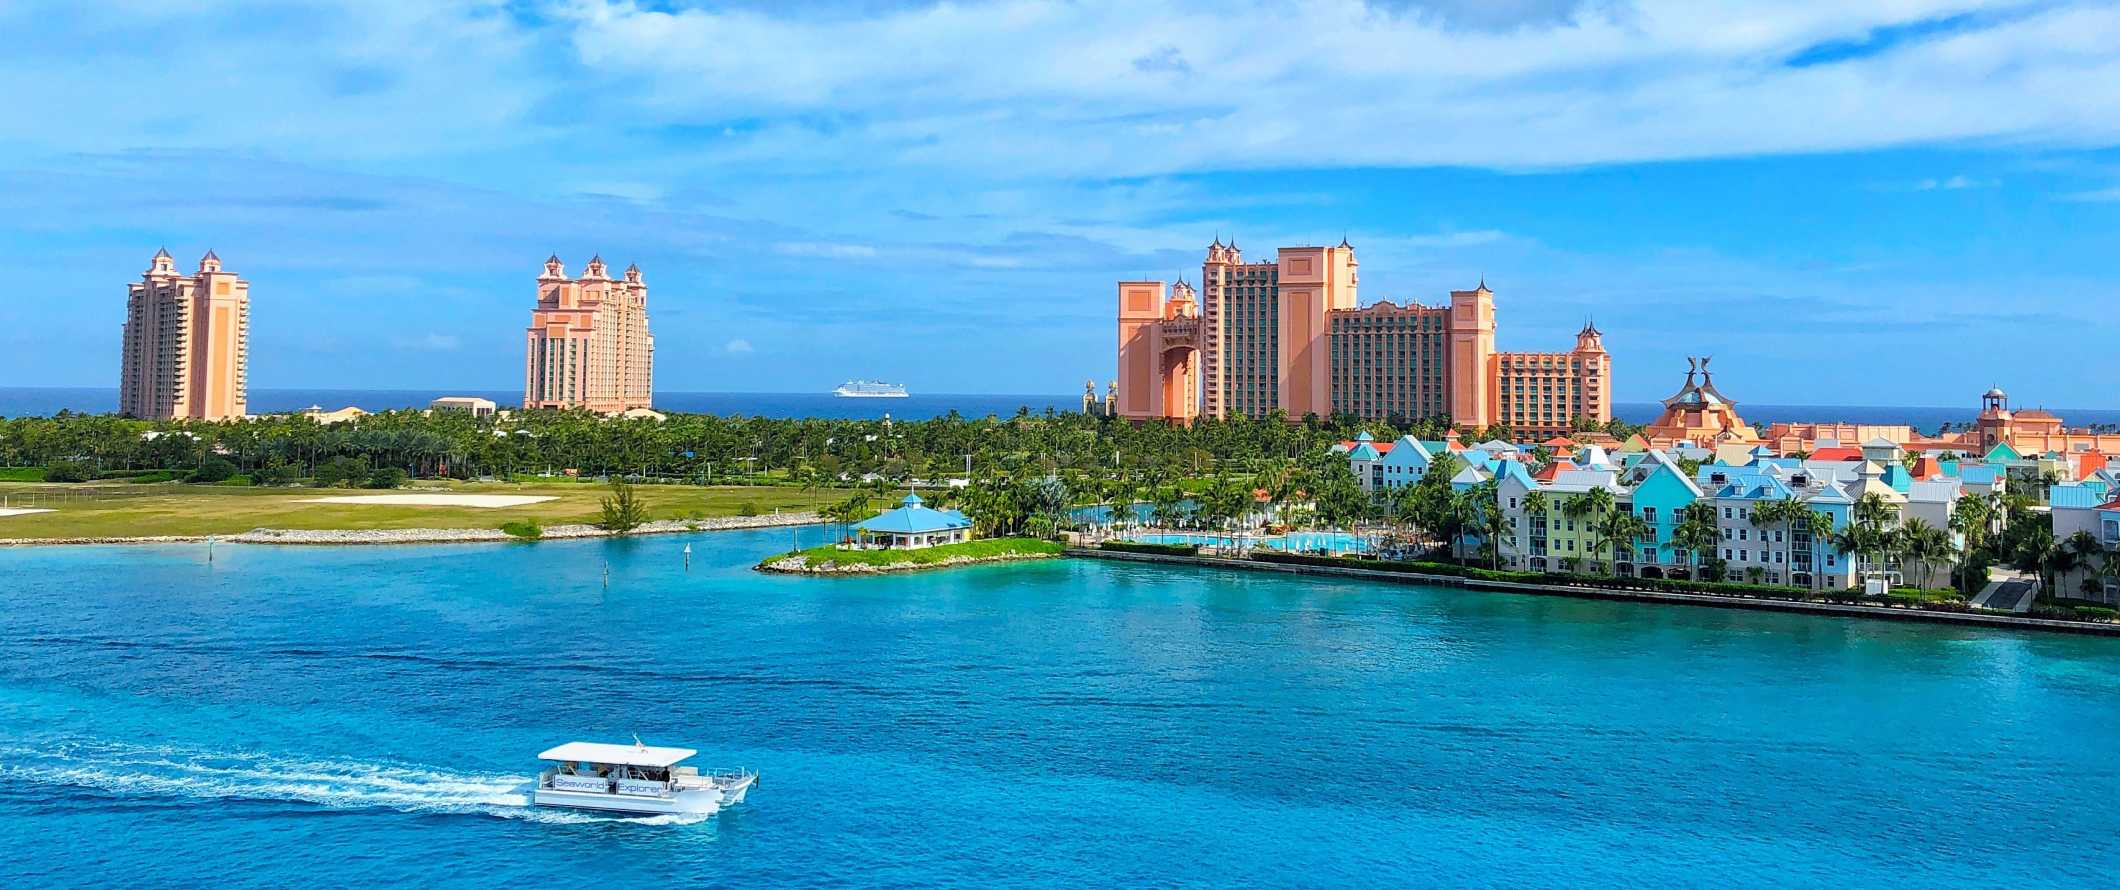 The Atlantis hotel complex in the background with a boat going by bright blue waters in the foreground, in the Bahamas